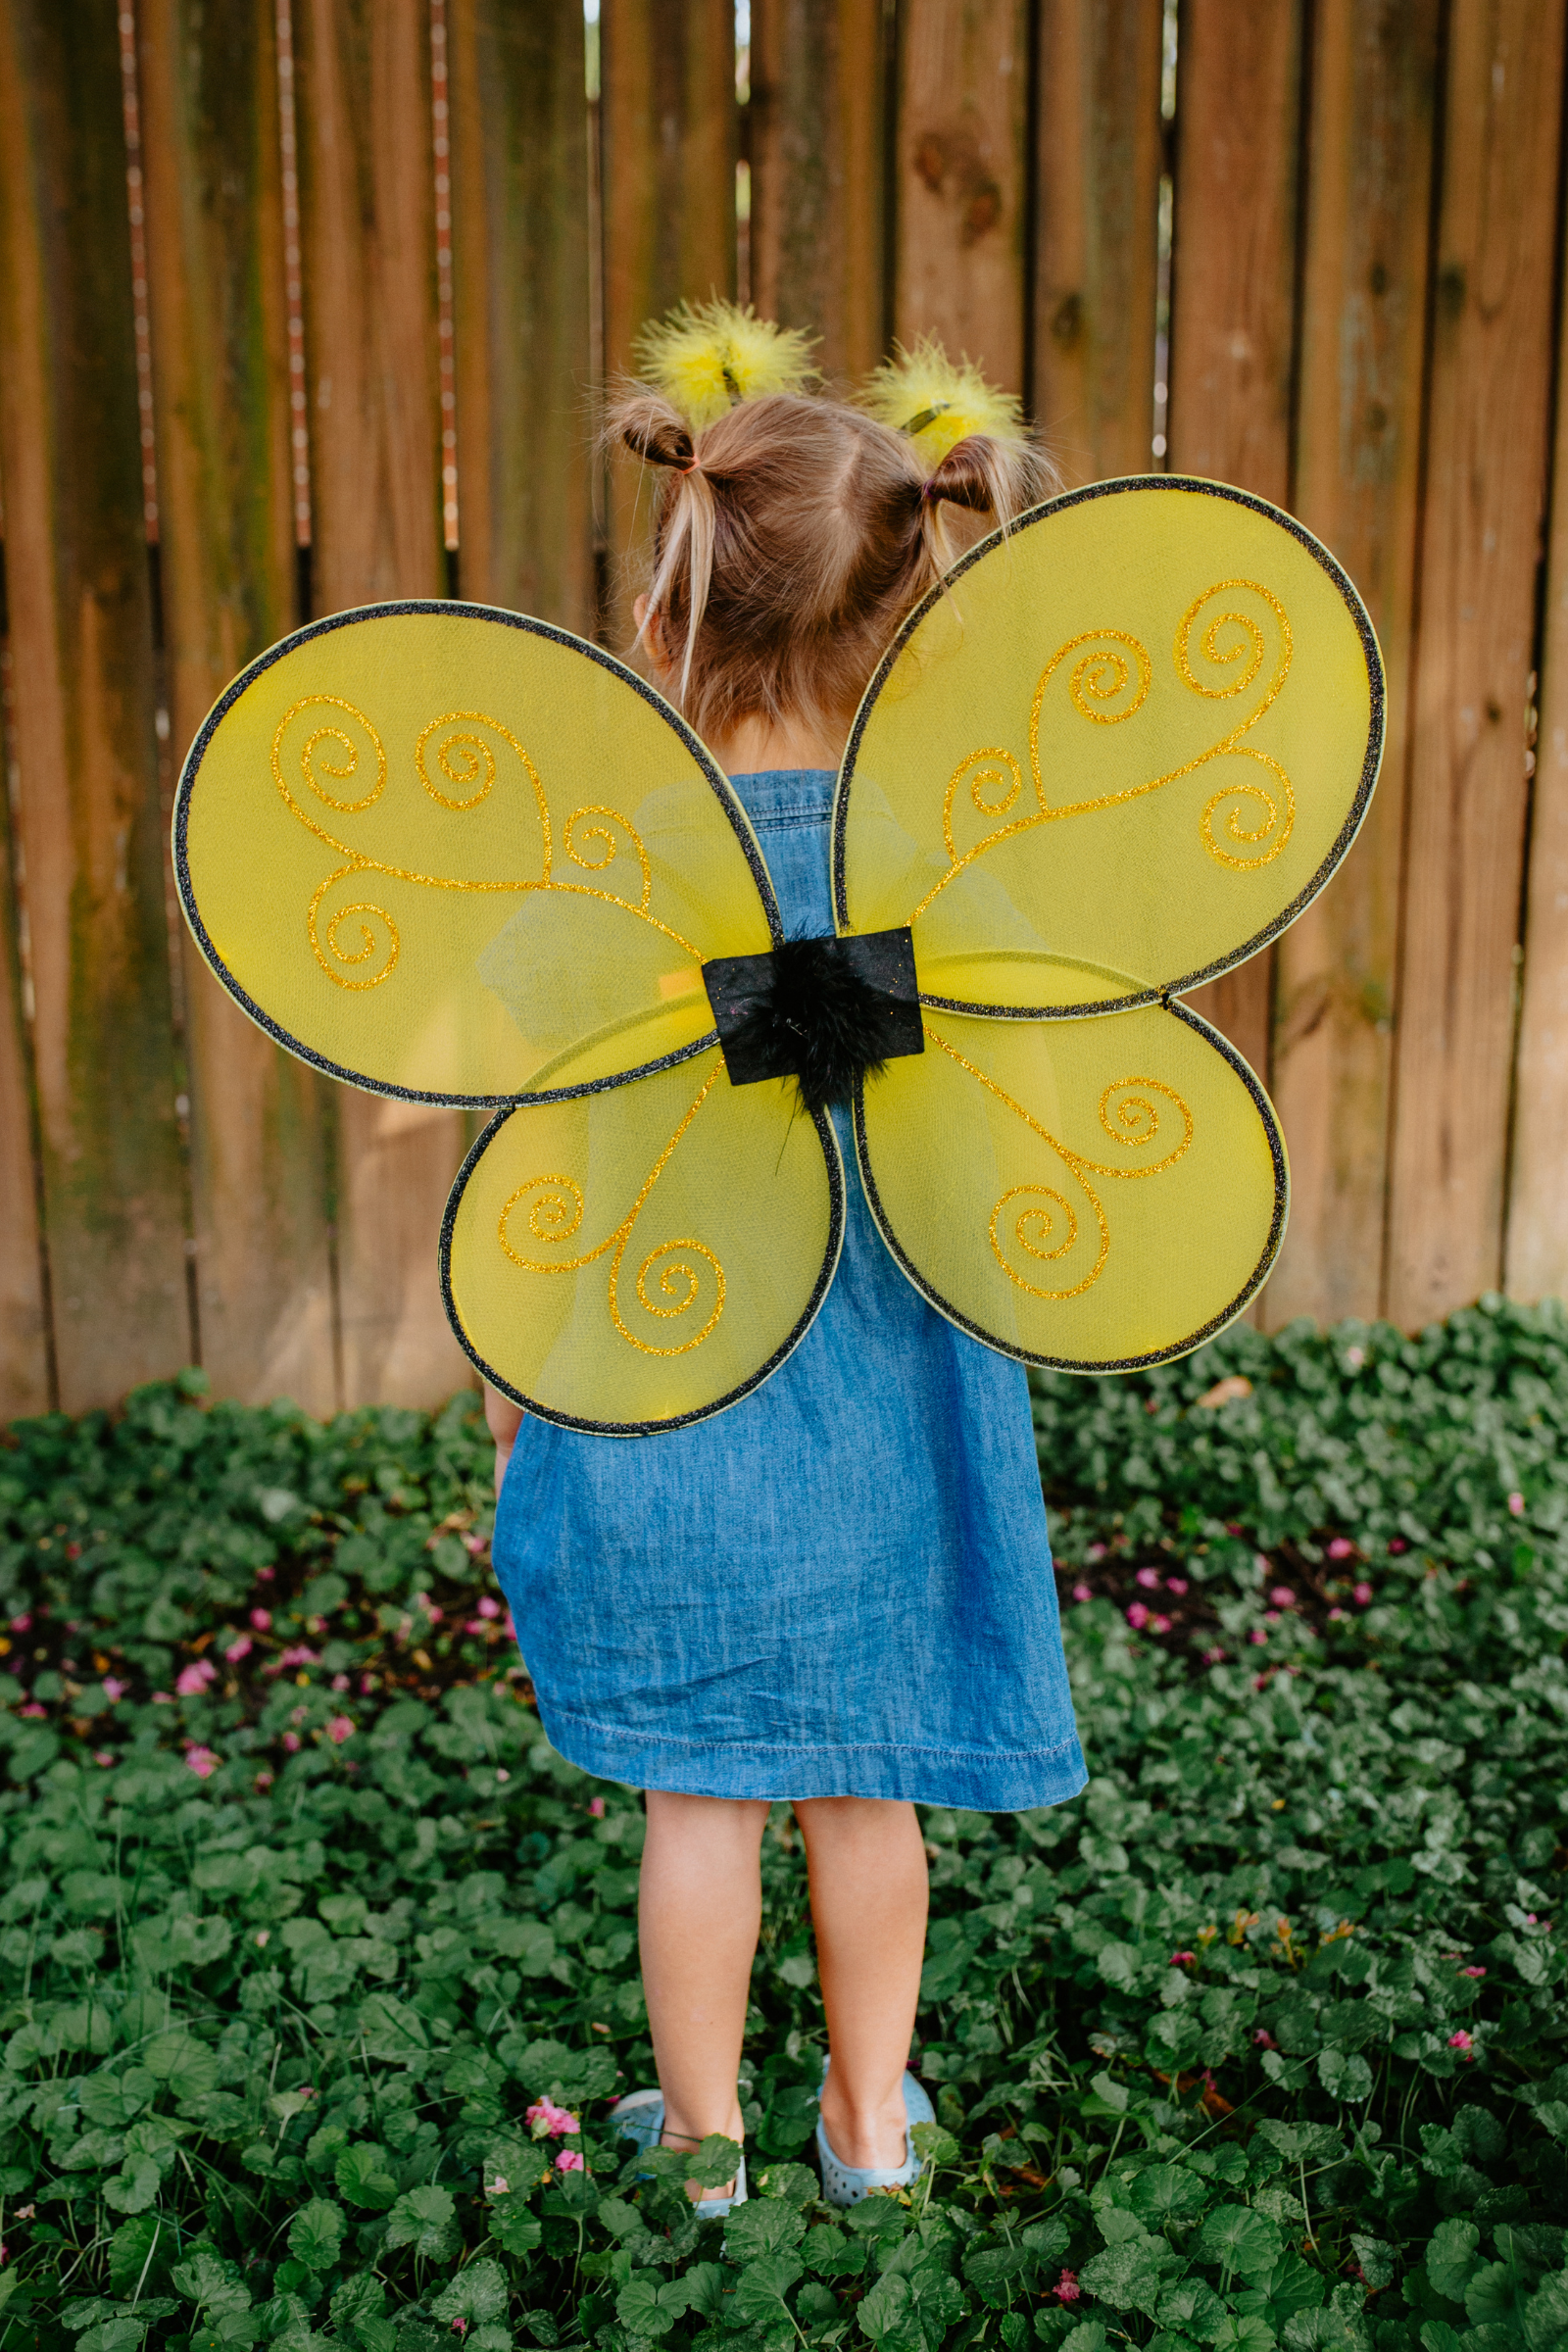 Funcredible Bumble Bee Costume Accessories Bee Wings and Bee